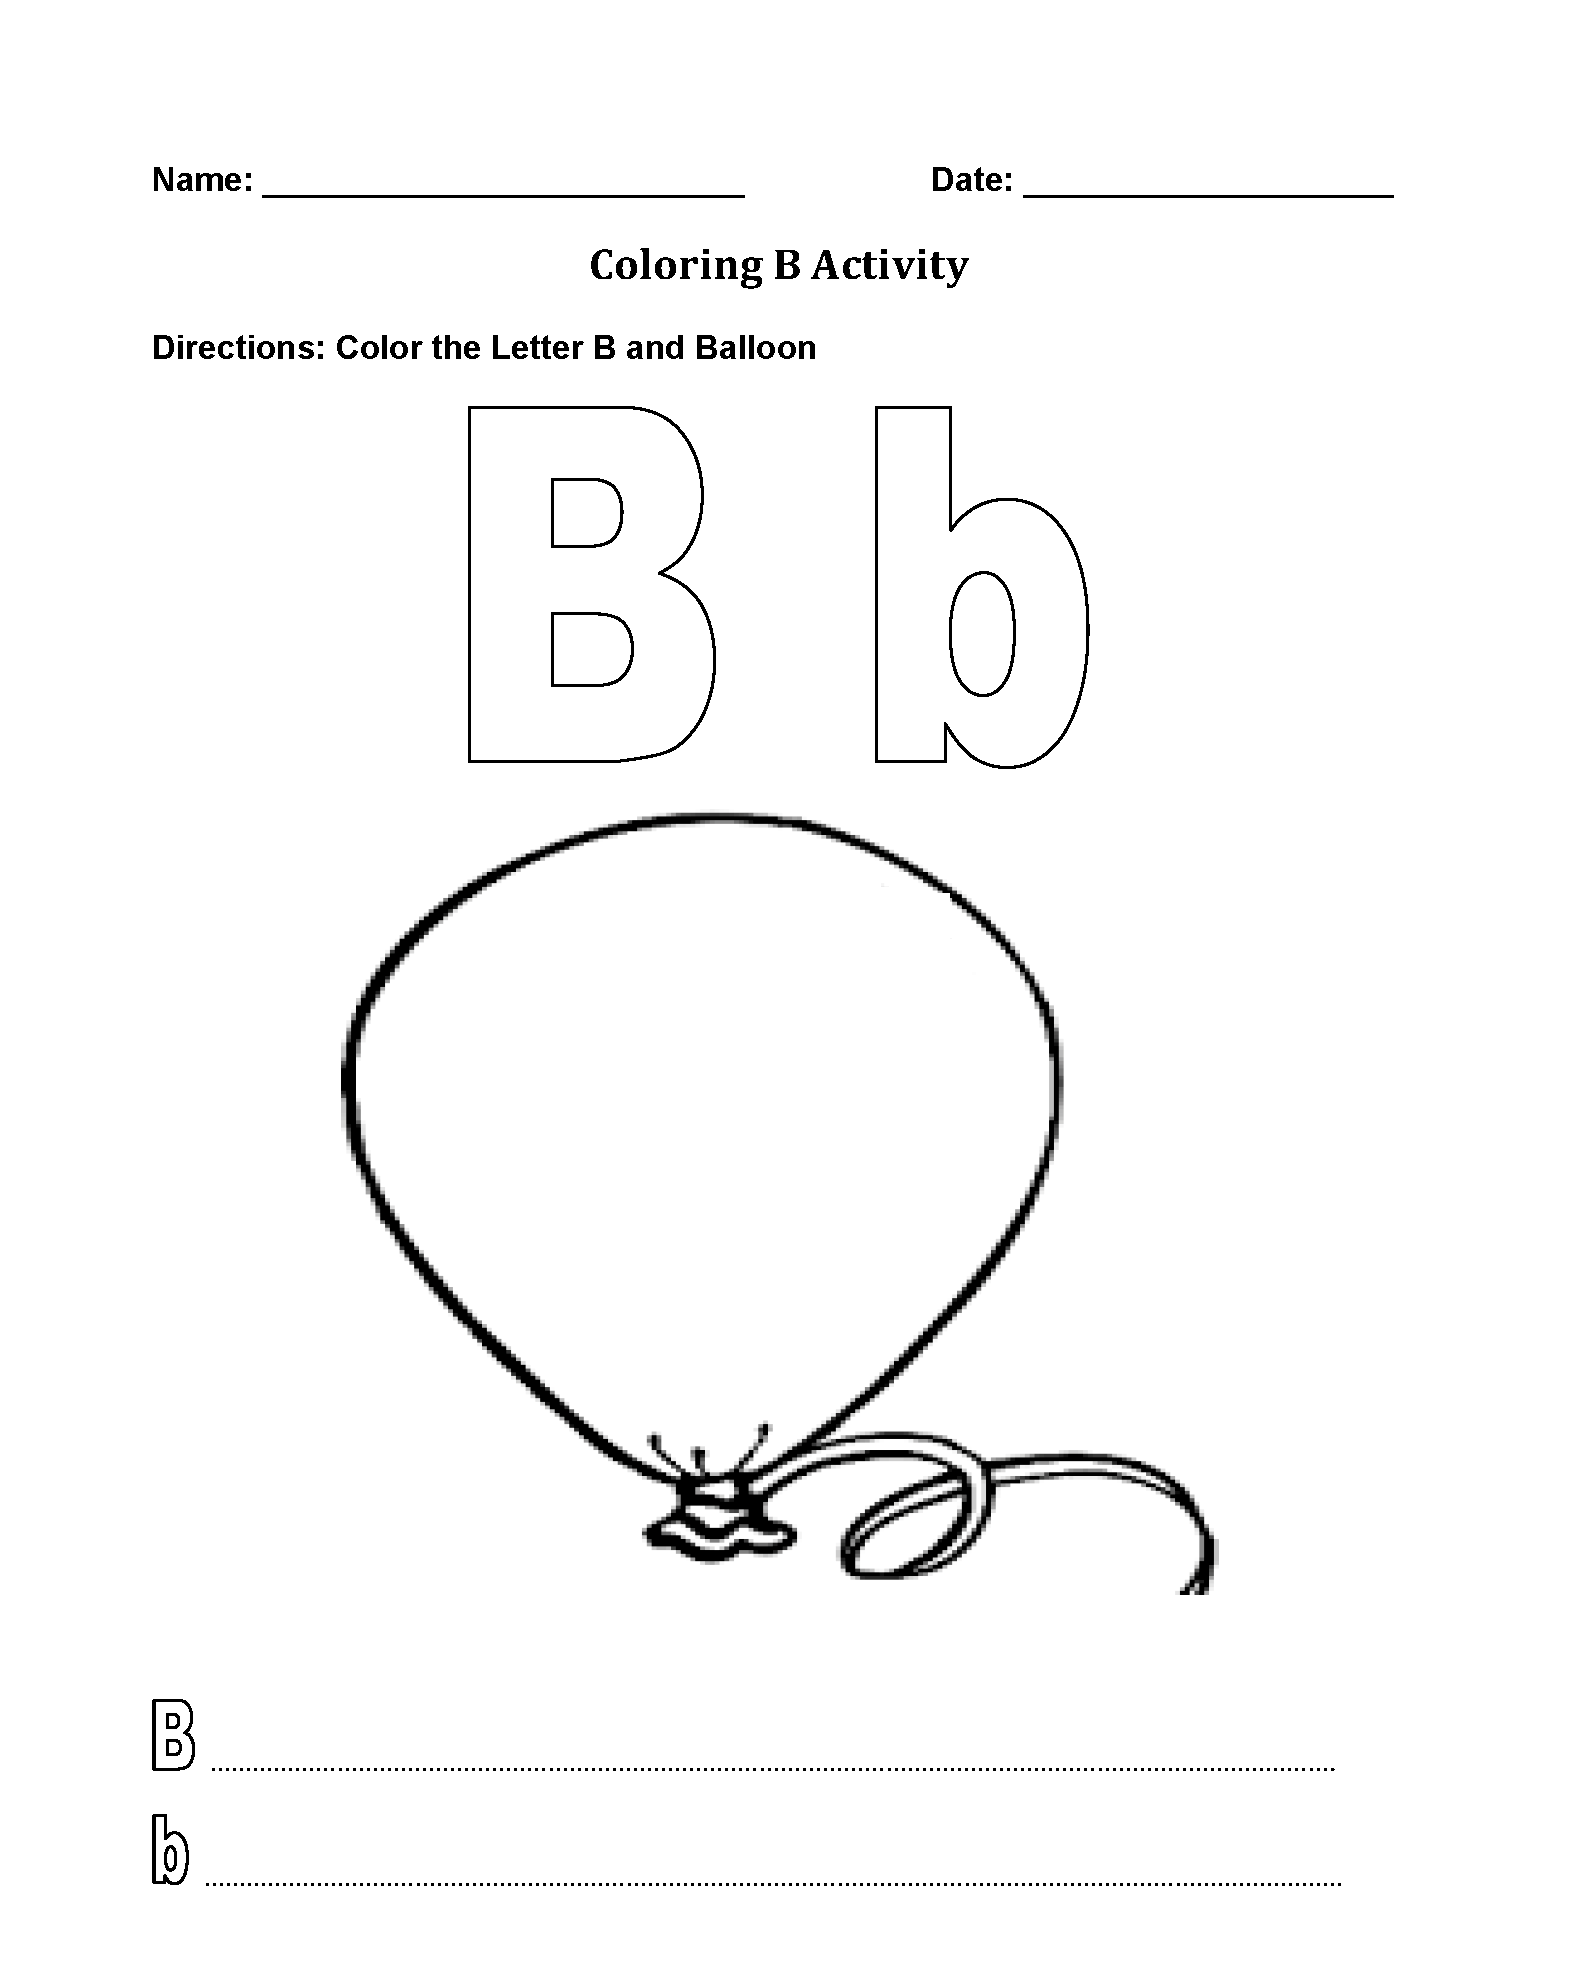 worksheets-for-the-letter-b-google-search-teaching-printable-letter-b